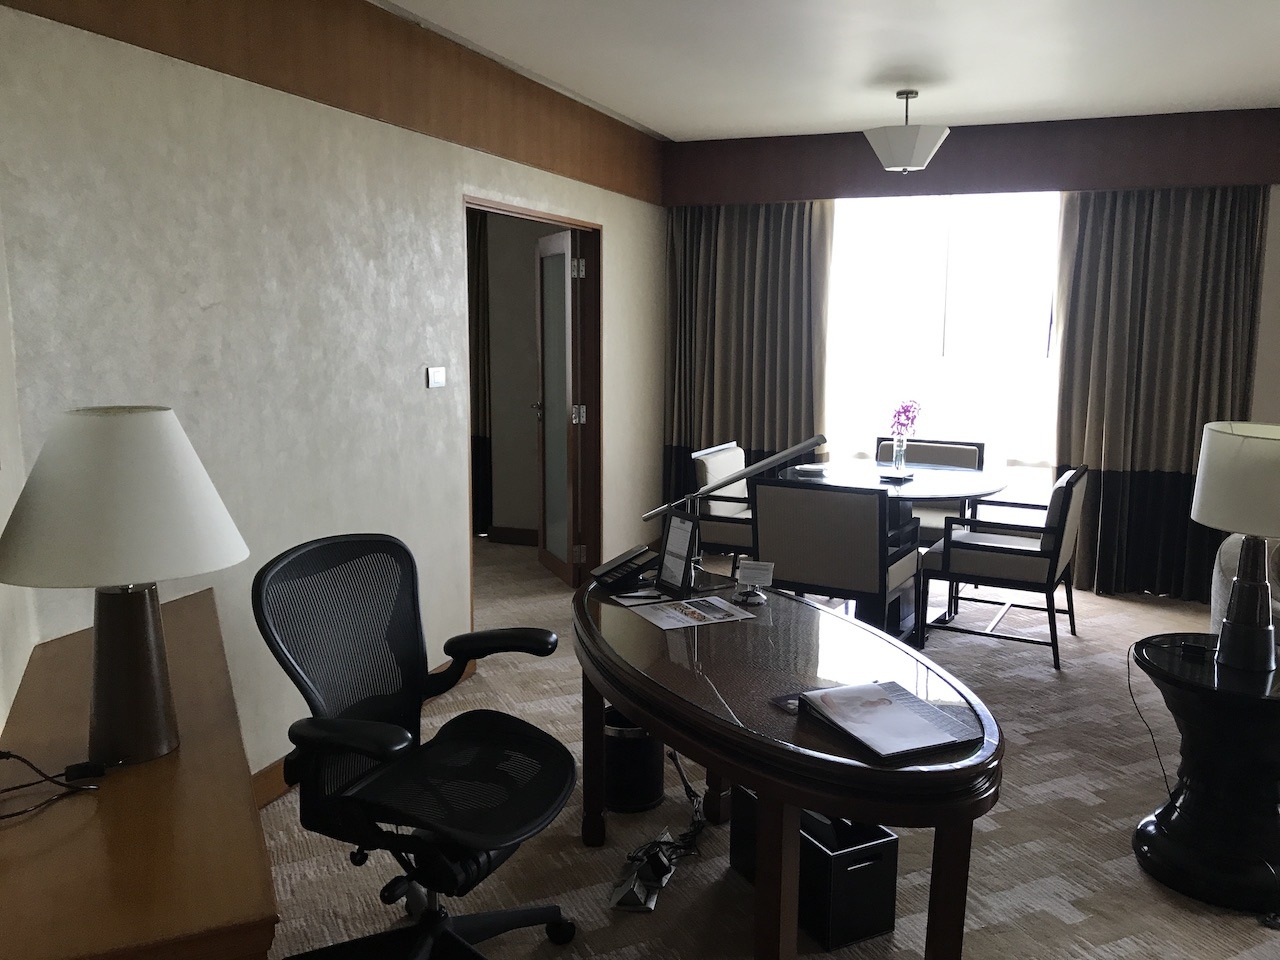 Suite desk and work area